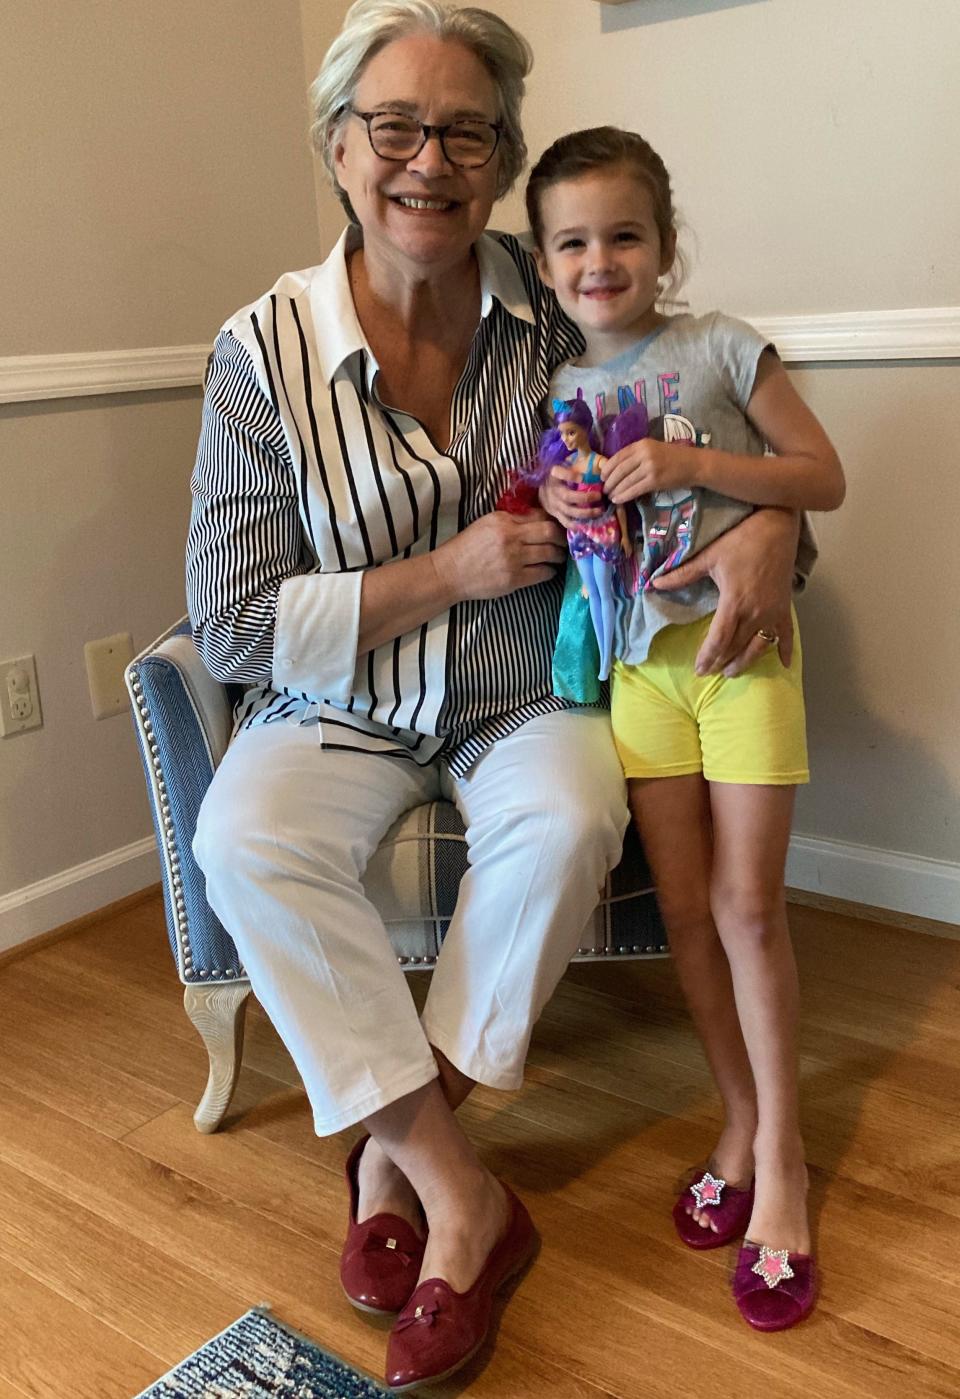 Brenda Mickey, seen here with her granddaughter, returned to her work as a perioperative nurse at Saint Anne's Hospital, after retiring in 2019 to help care for her husband.